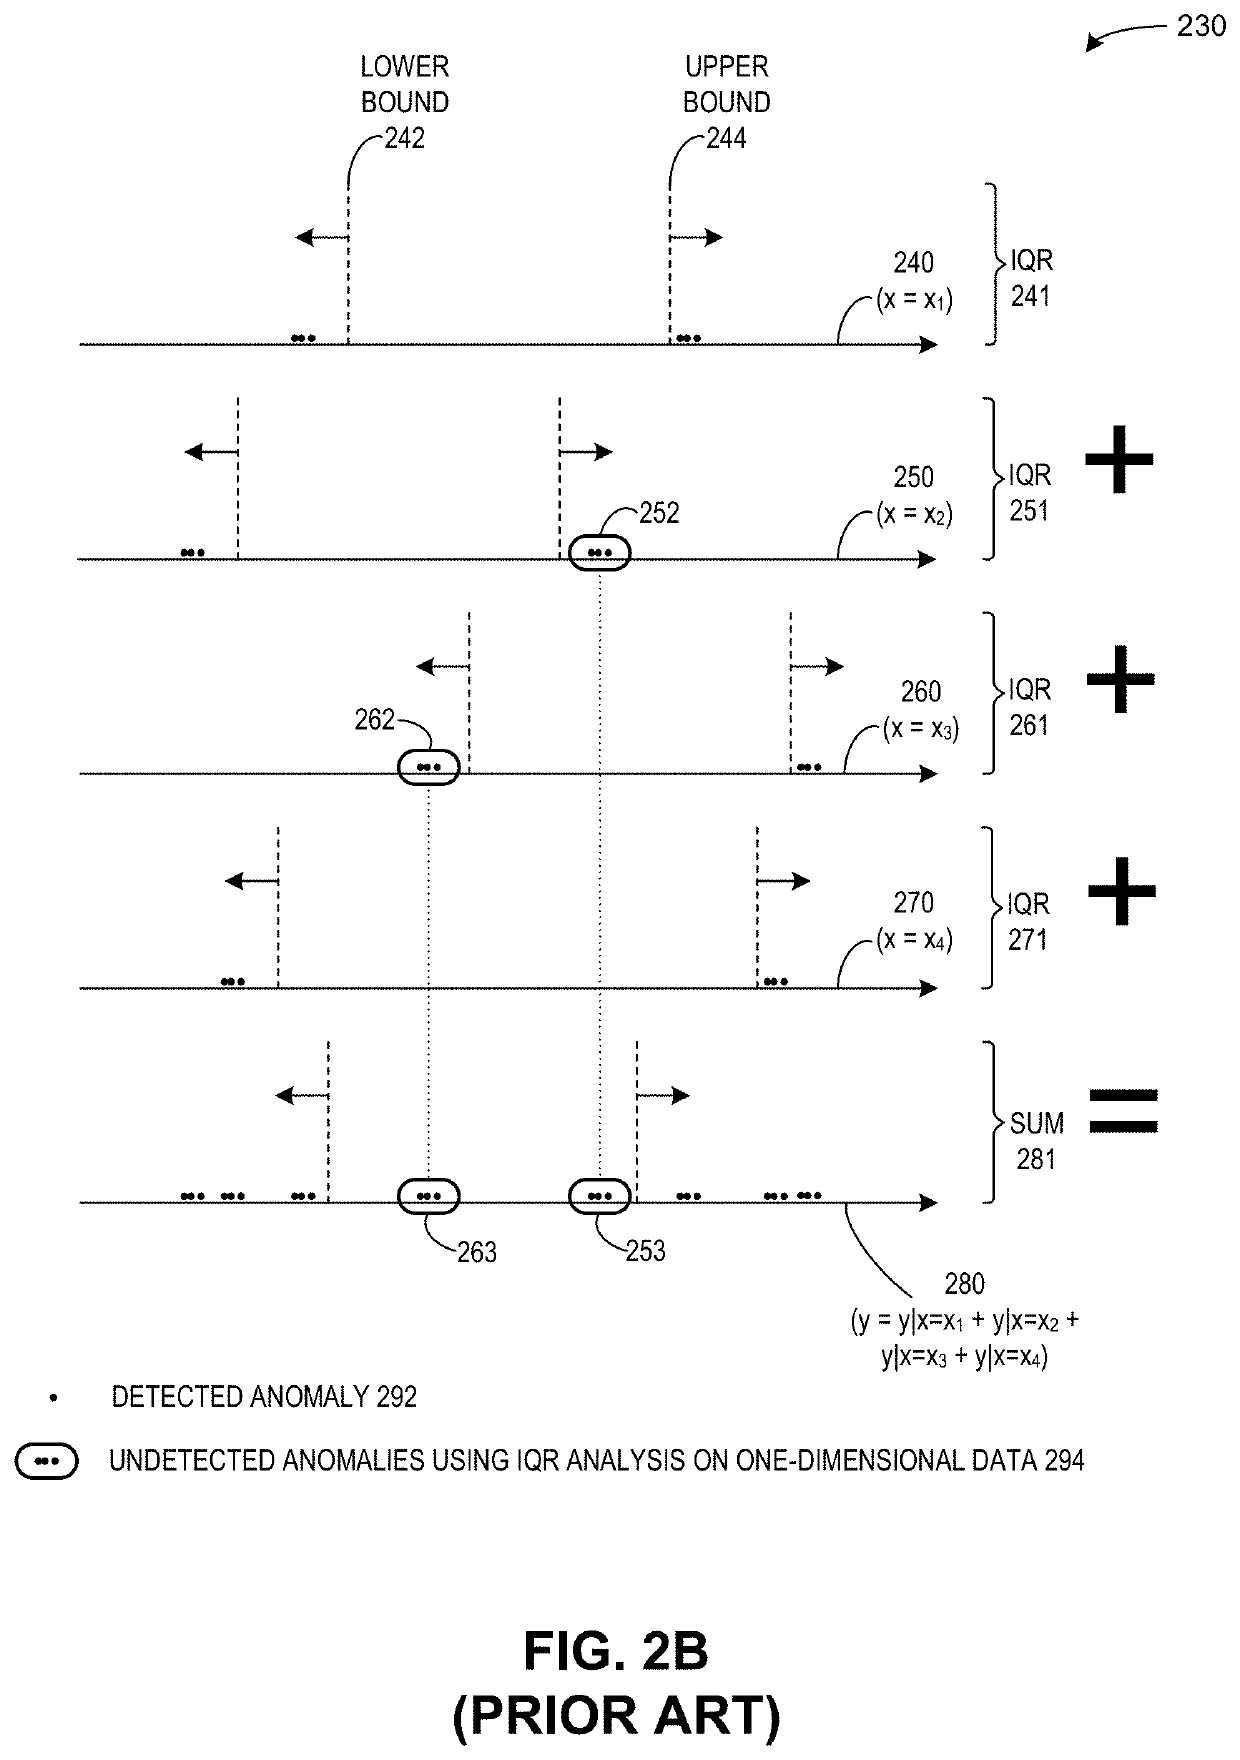 System and method for binned inter-quartile range analysis in anomaly detection of a data series